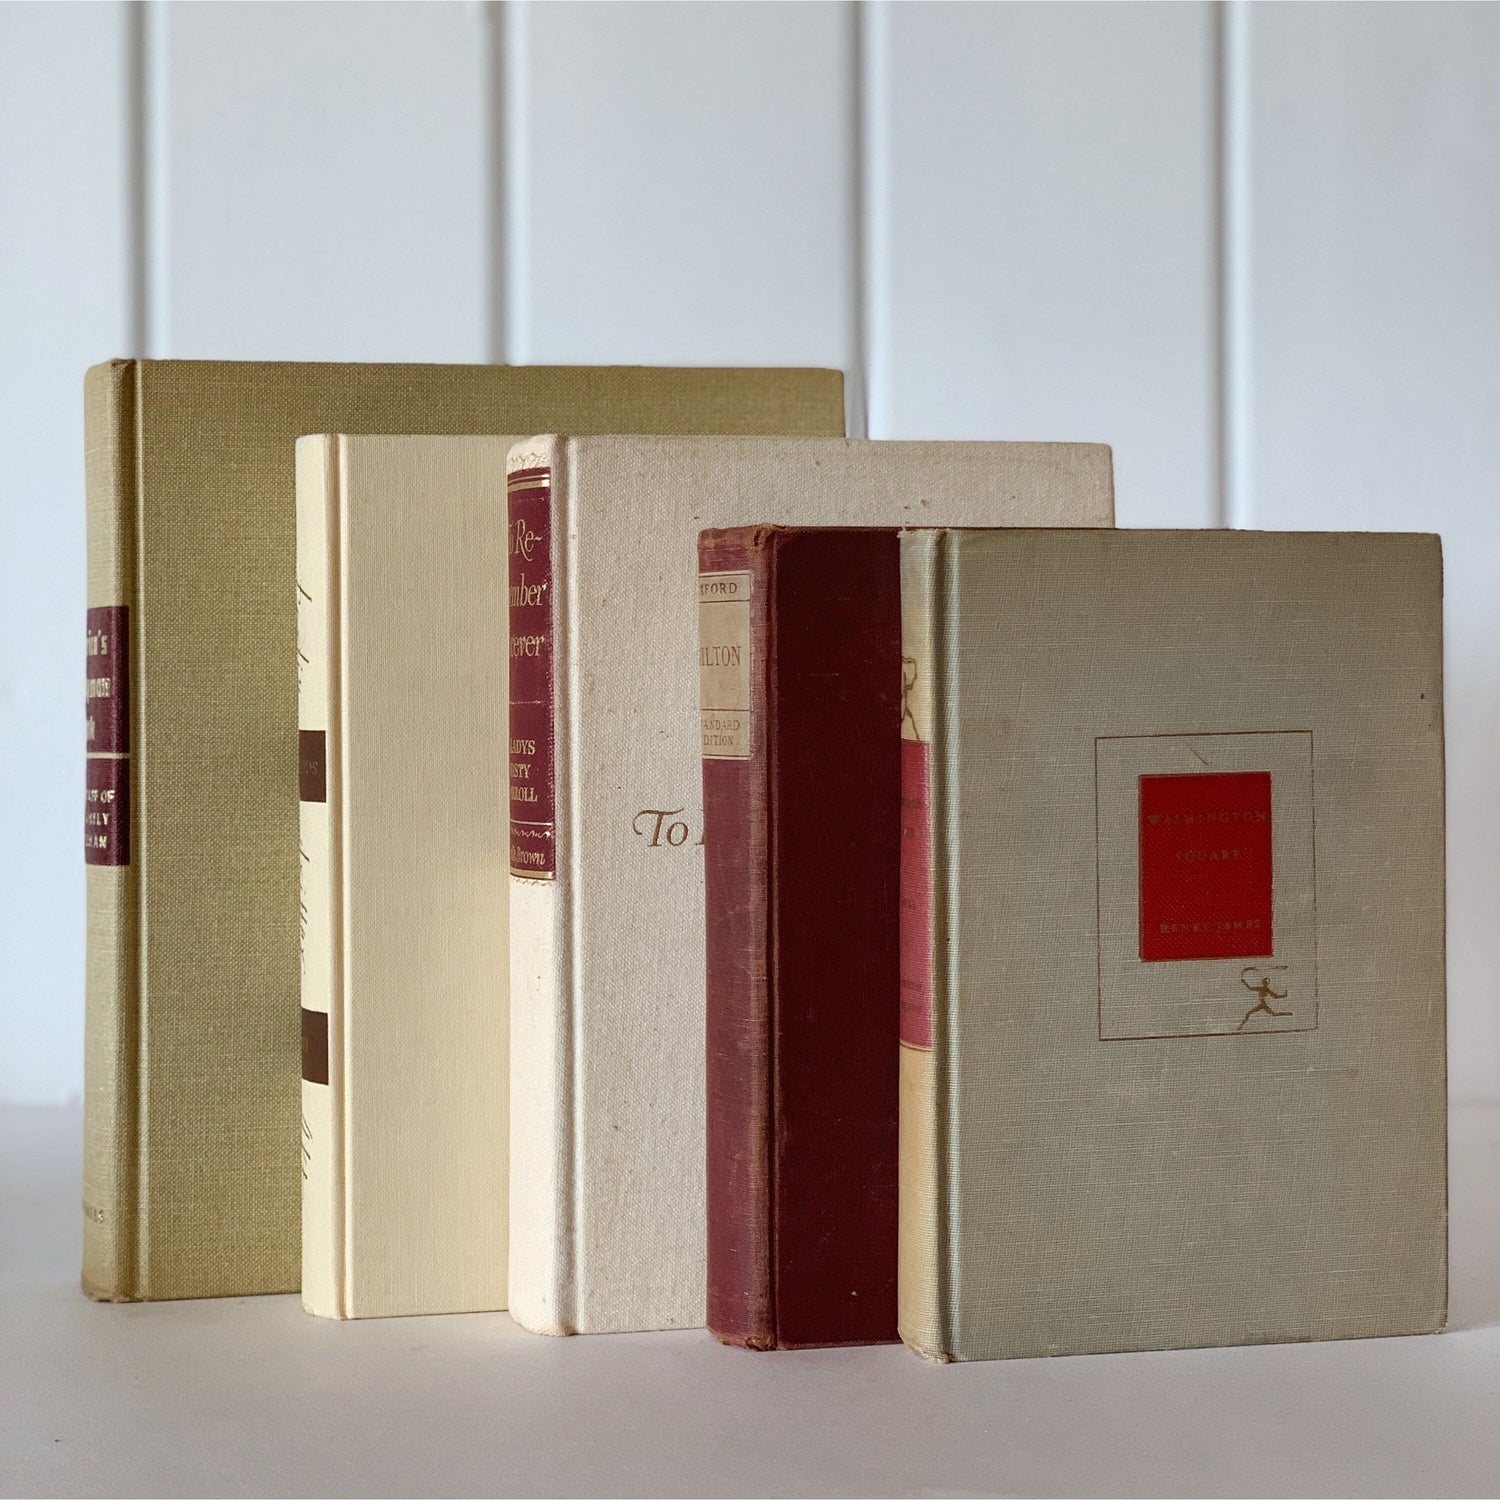 Maroon and Beige Vintage Book Set, Mid Century Books for Shelf Styling